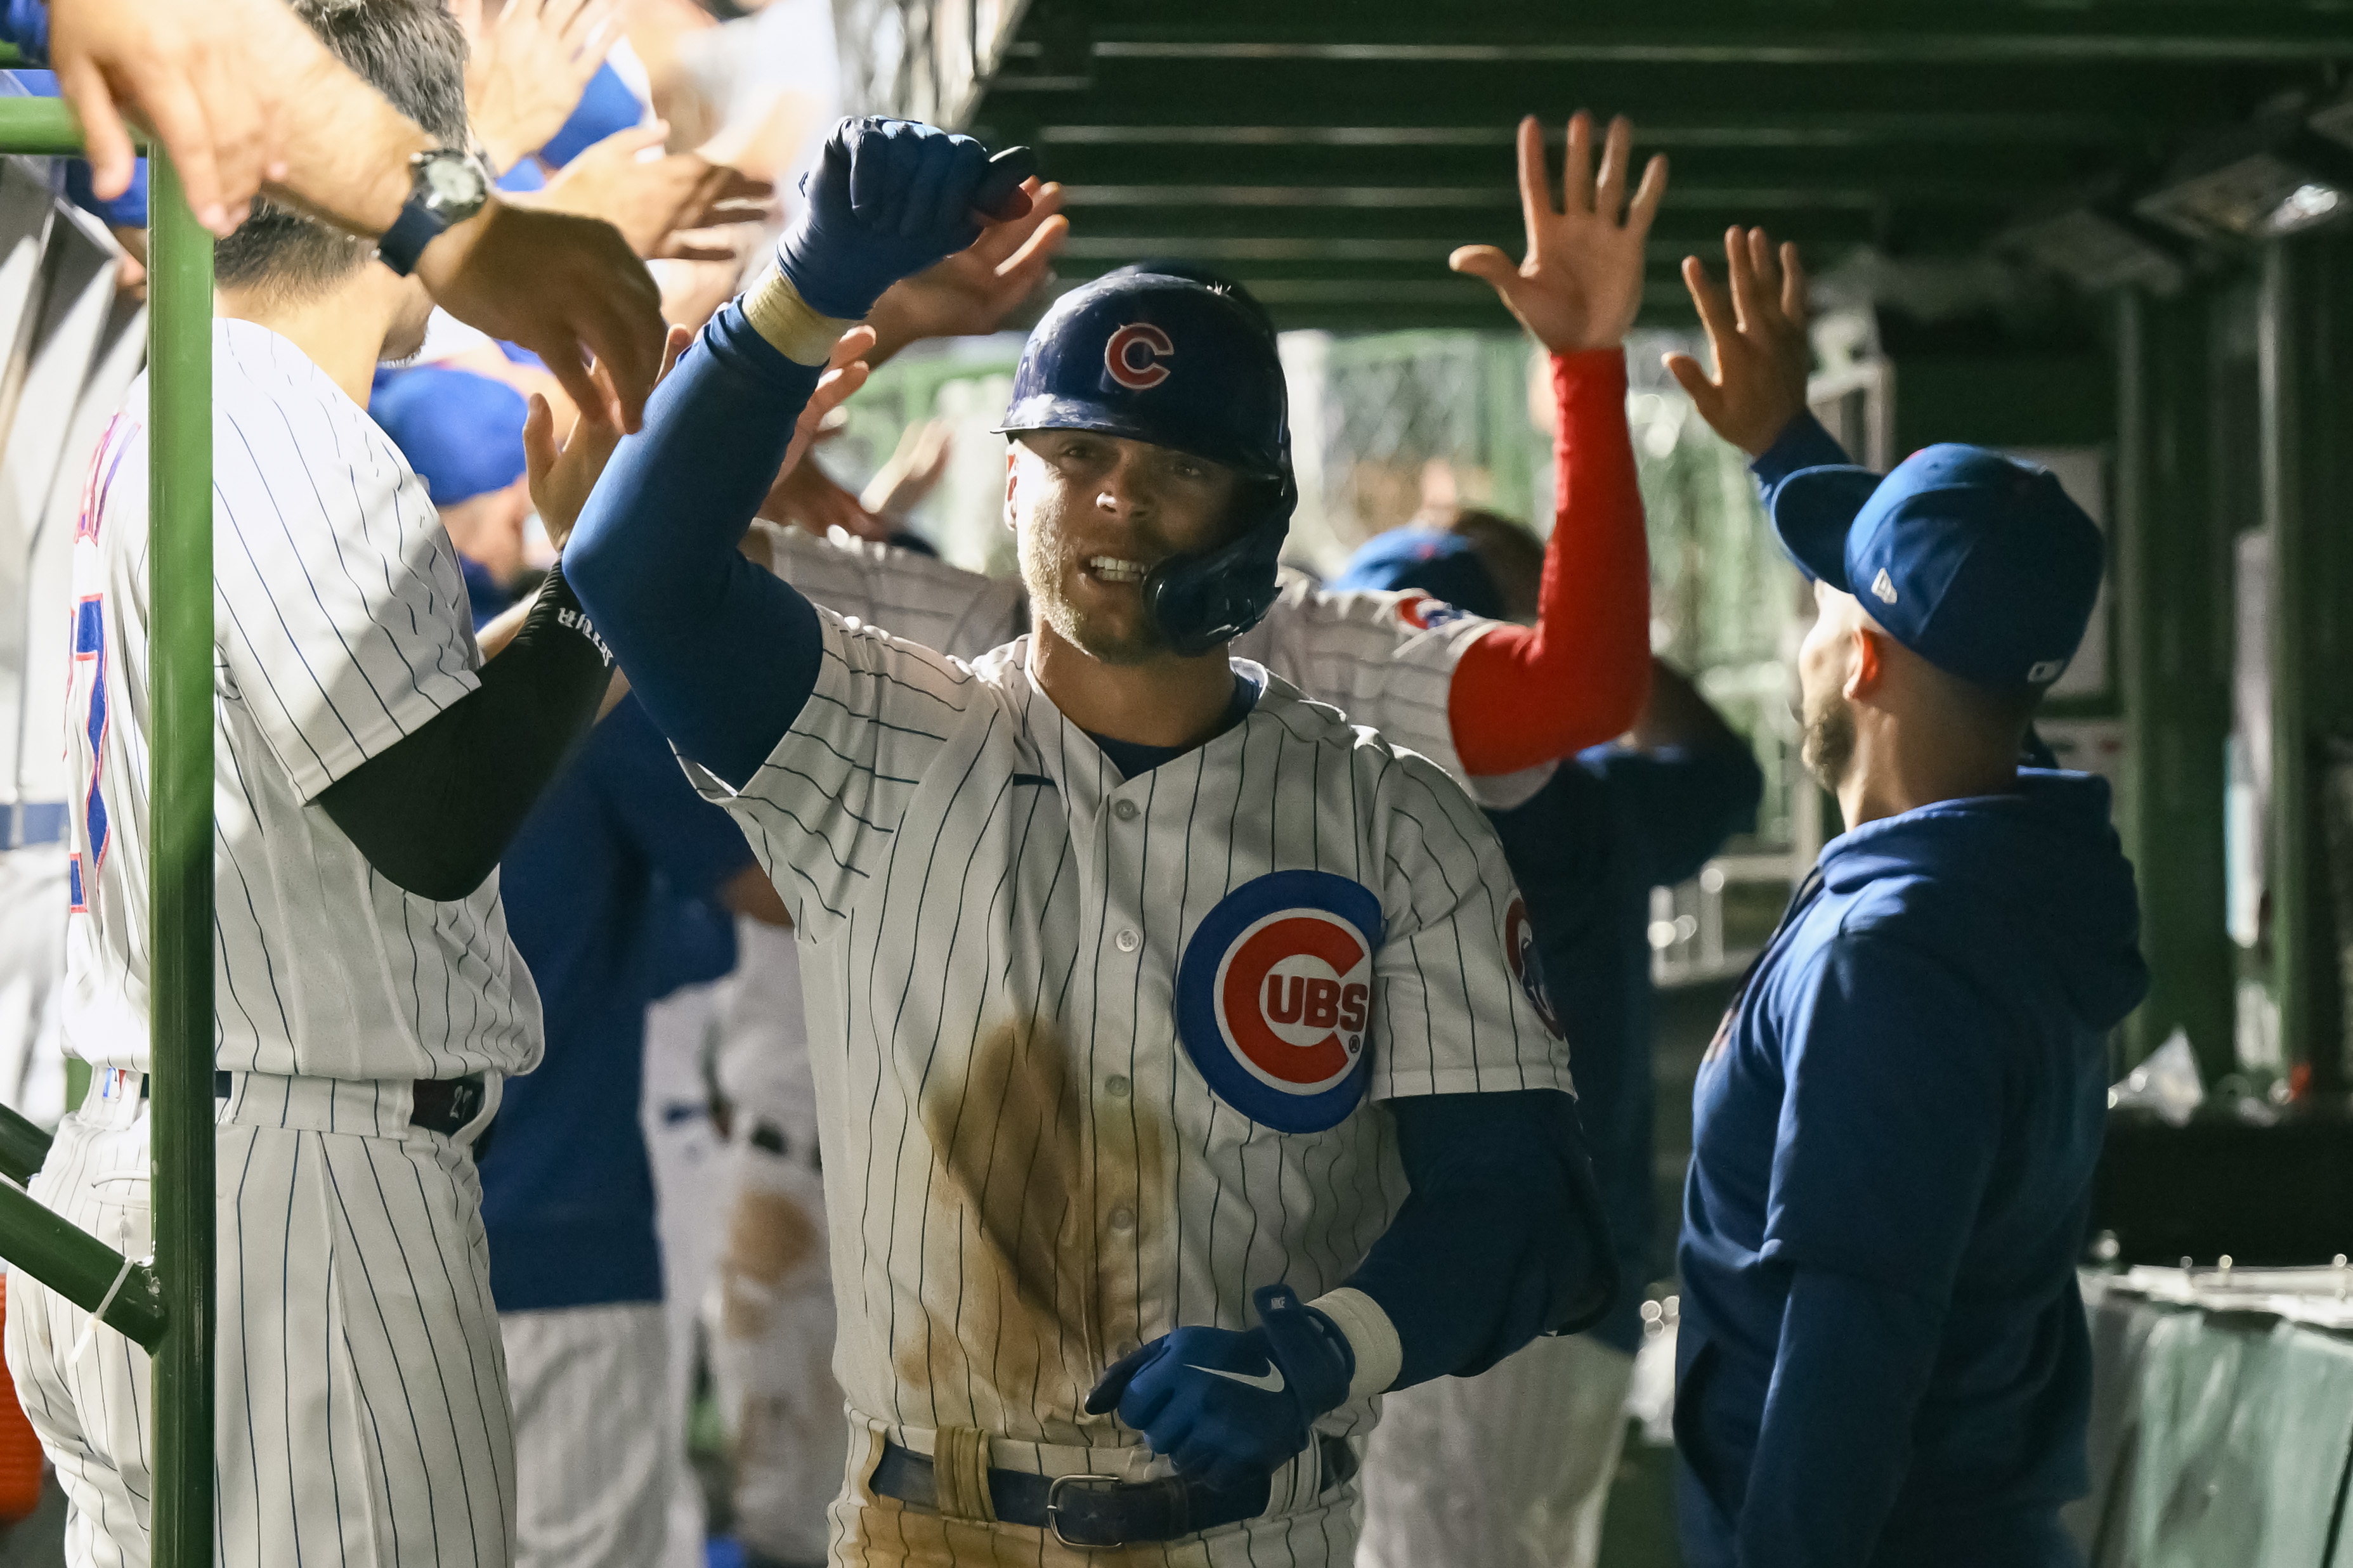 Hoerner's grand slam paves way for 8-3 Cubs win over Nationals